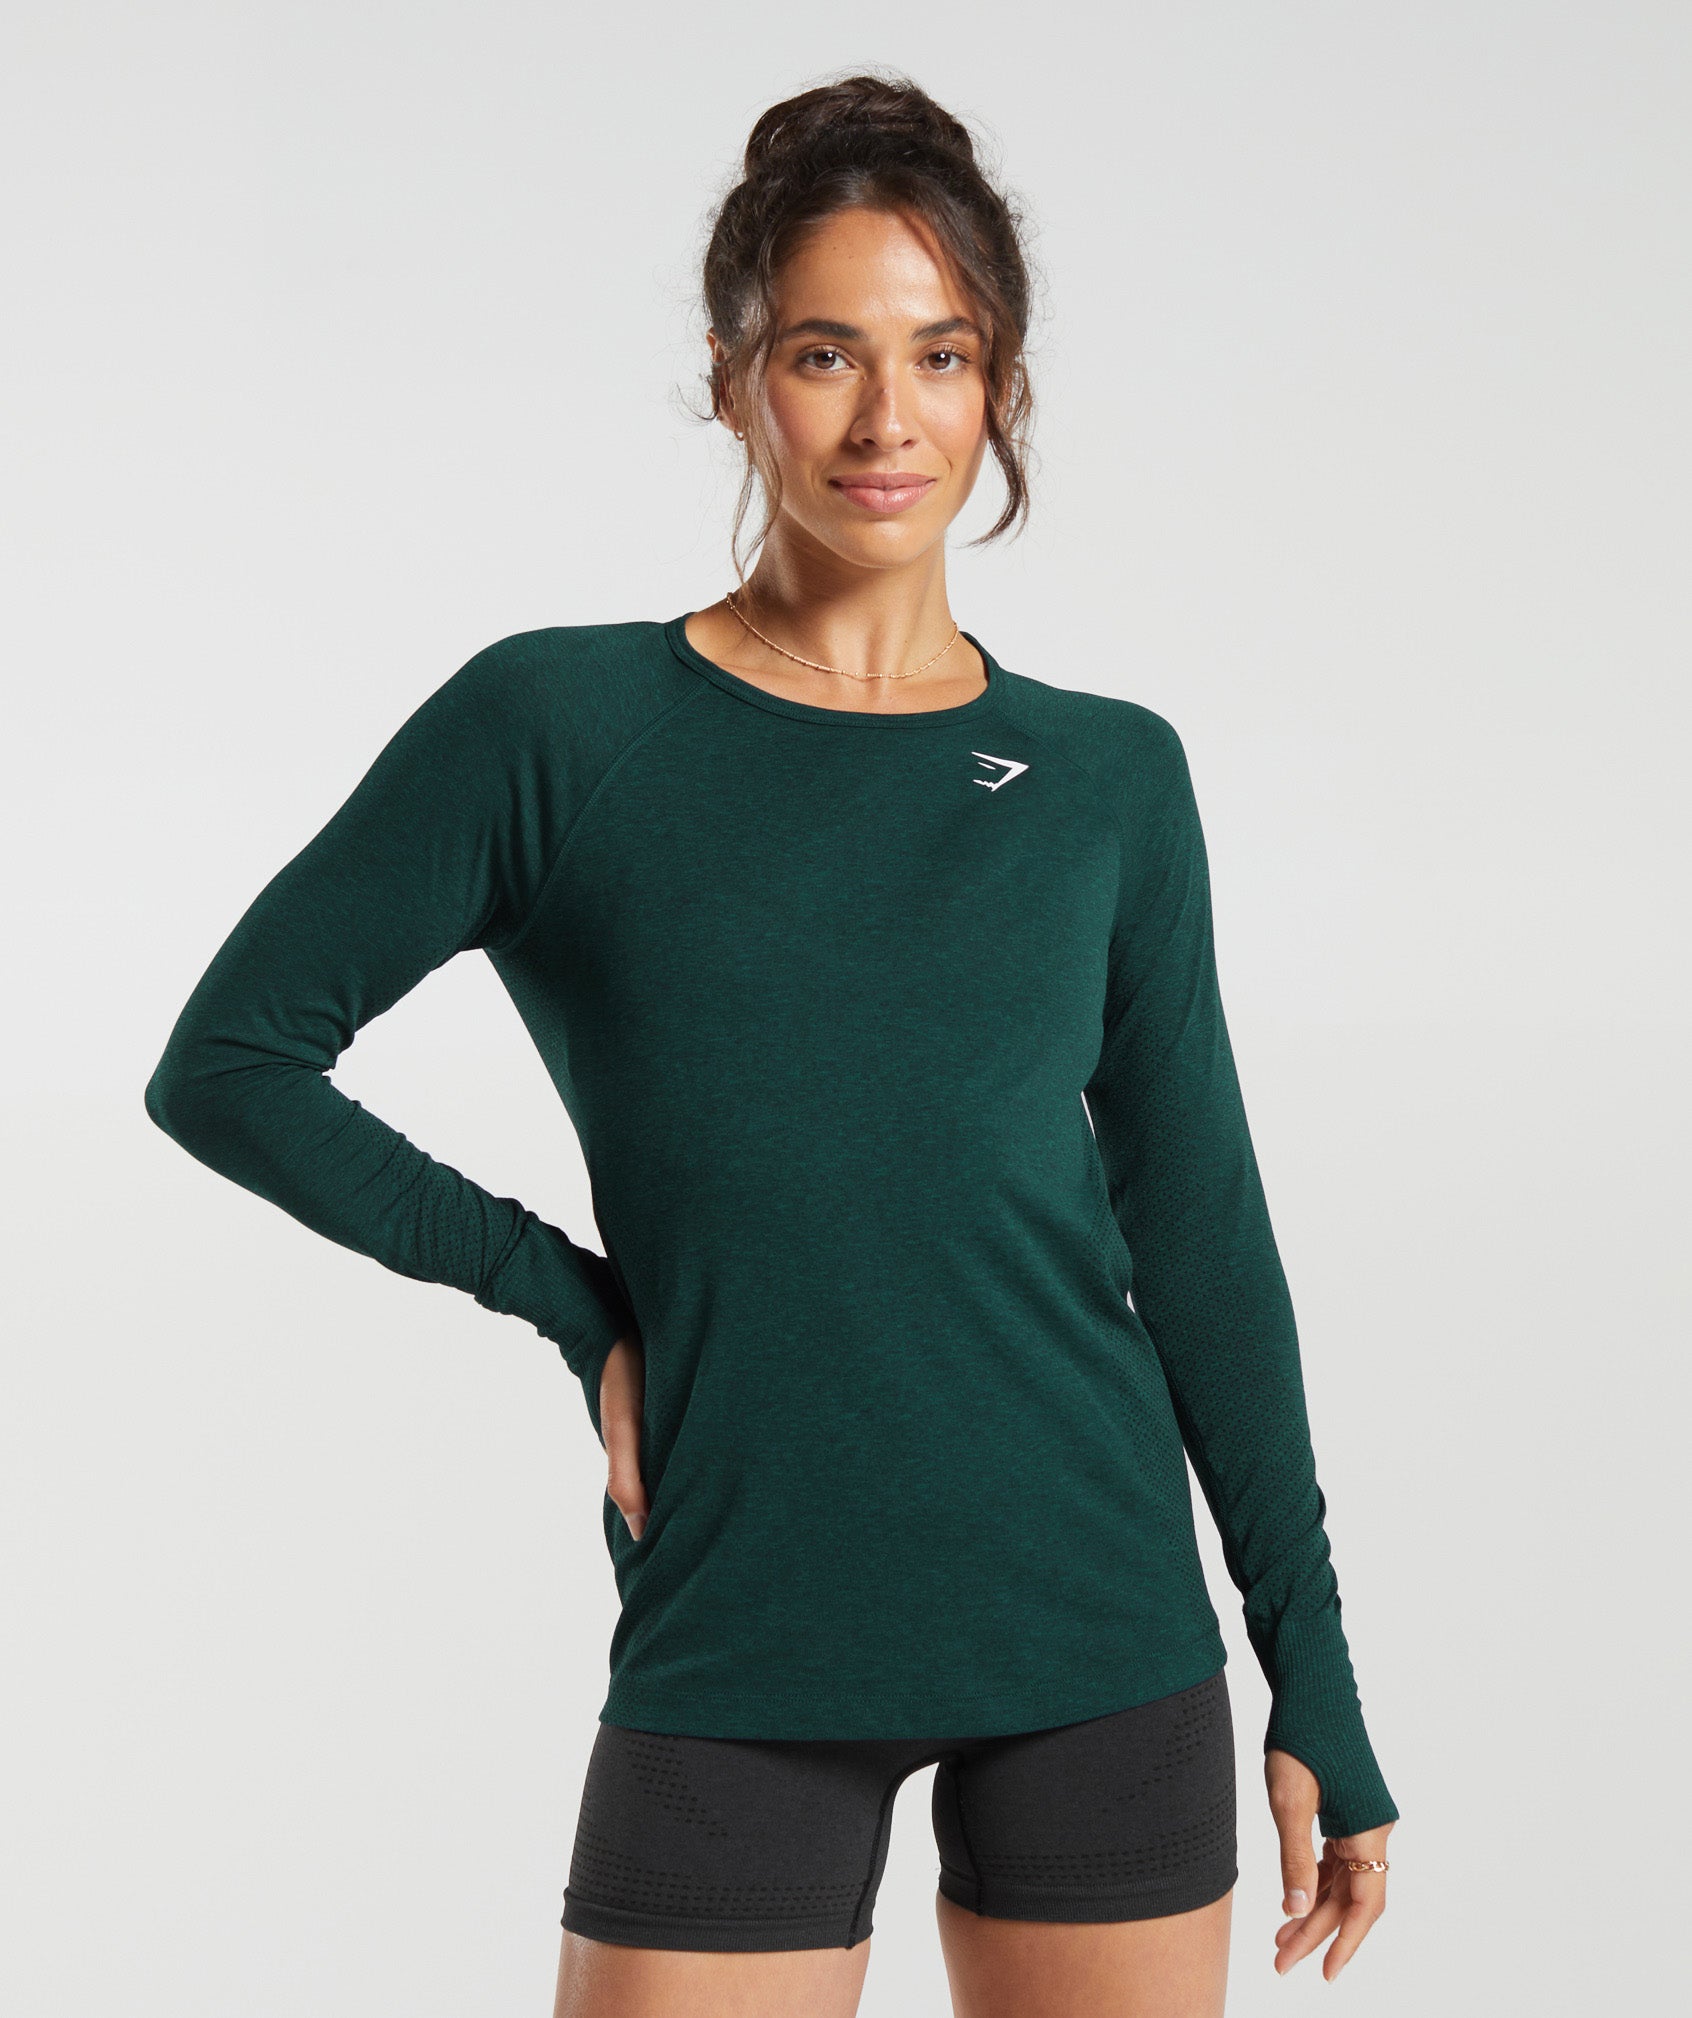 Vital Seamless 2.0 Light Long Sleeve Top in {{variantColor} is out of stock